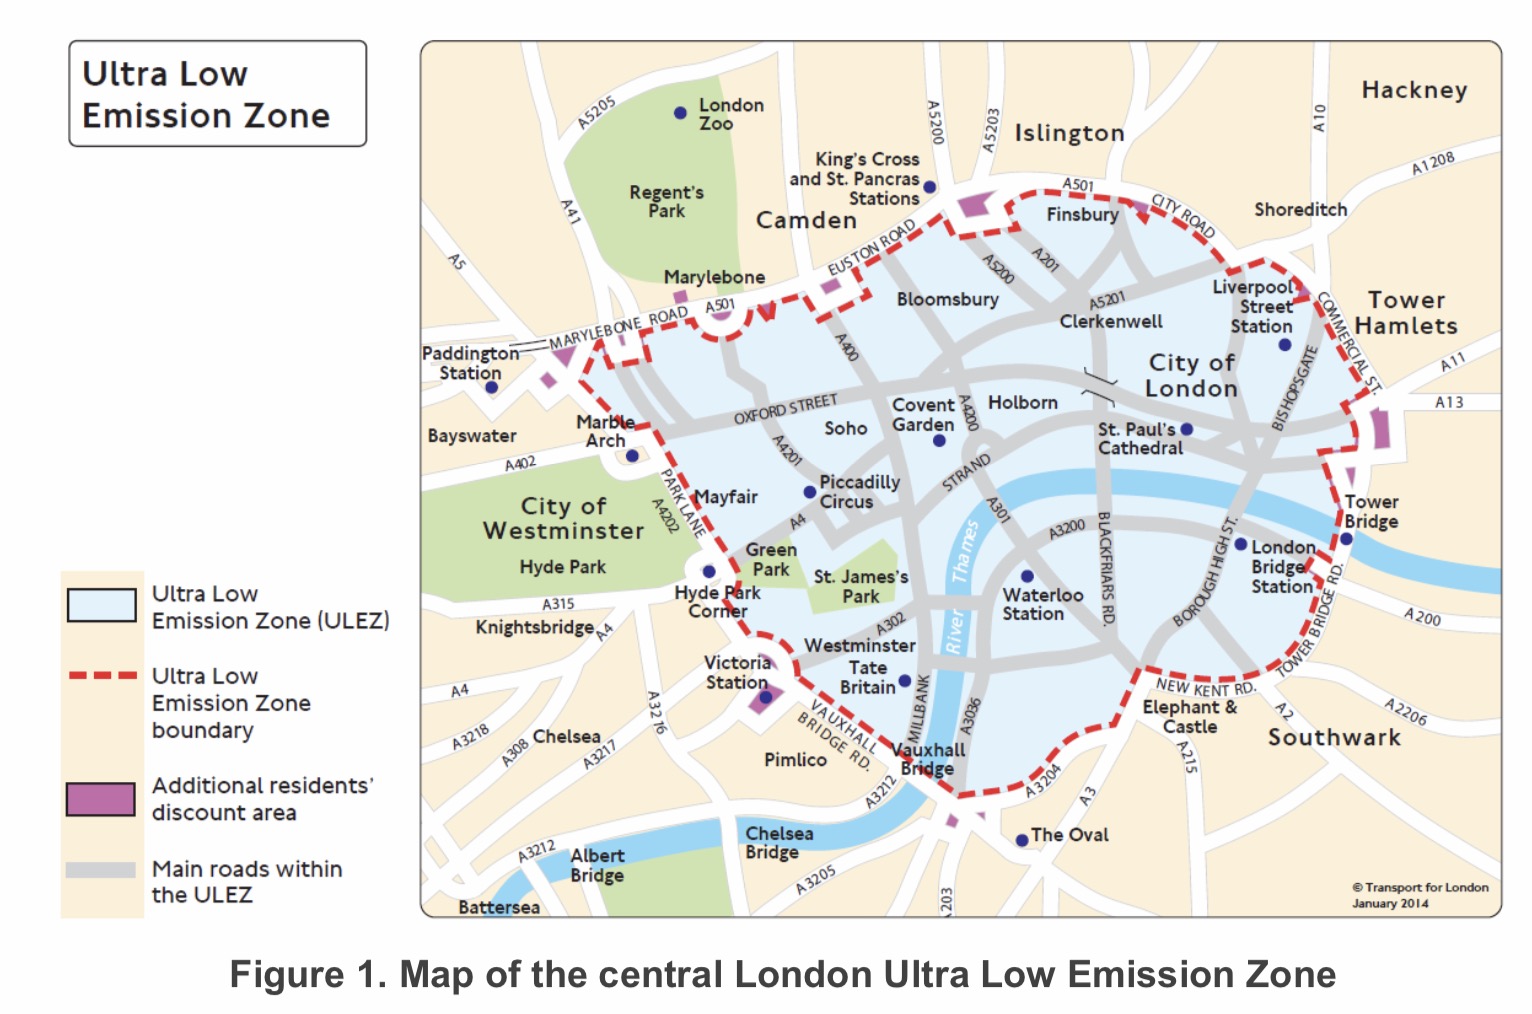 The Central London ULEZ started on 8 April 2019 and operates in the existing Central London Congestion Charge Zone. Figure 1 is a map of the area covered by the central ULEZ. Unlike the congestion charge (which operates Monday to Friday between 07:00 and 16:00 hours) the ULEZ operates 24 hours a day, every day of the year. Vehicles must meet strict emission standards to drive in the ULEZ area.